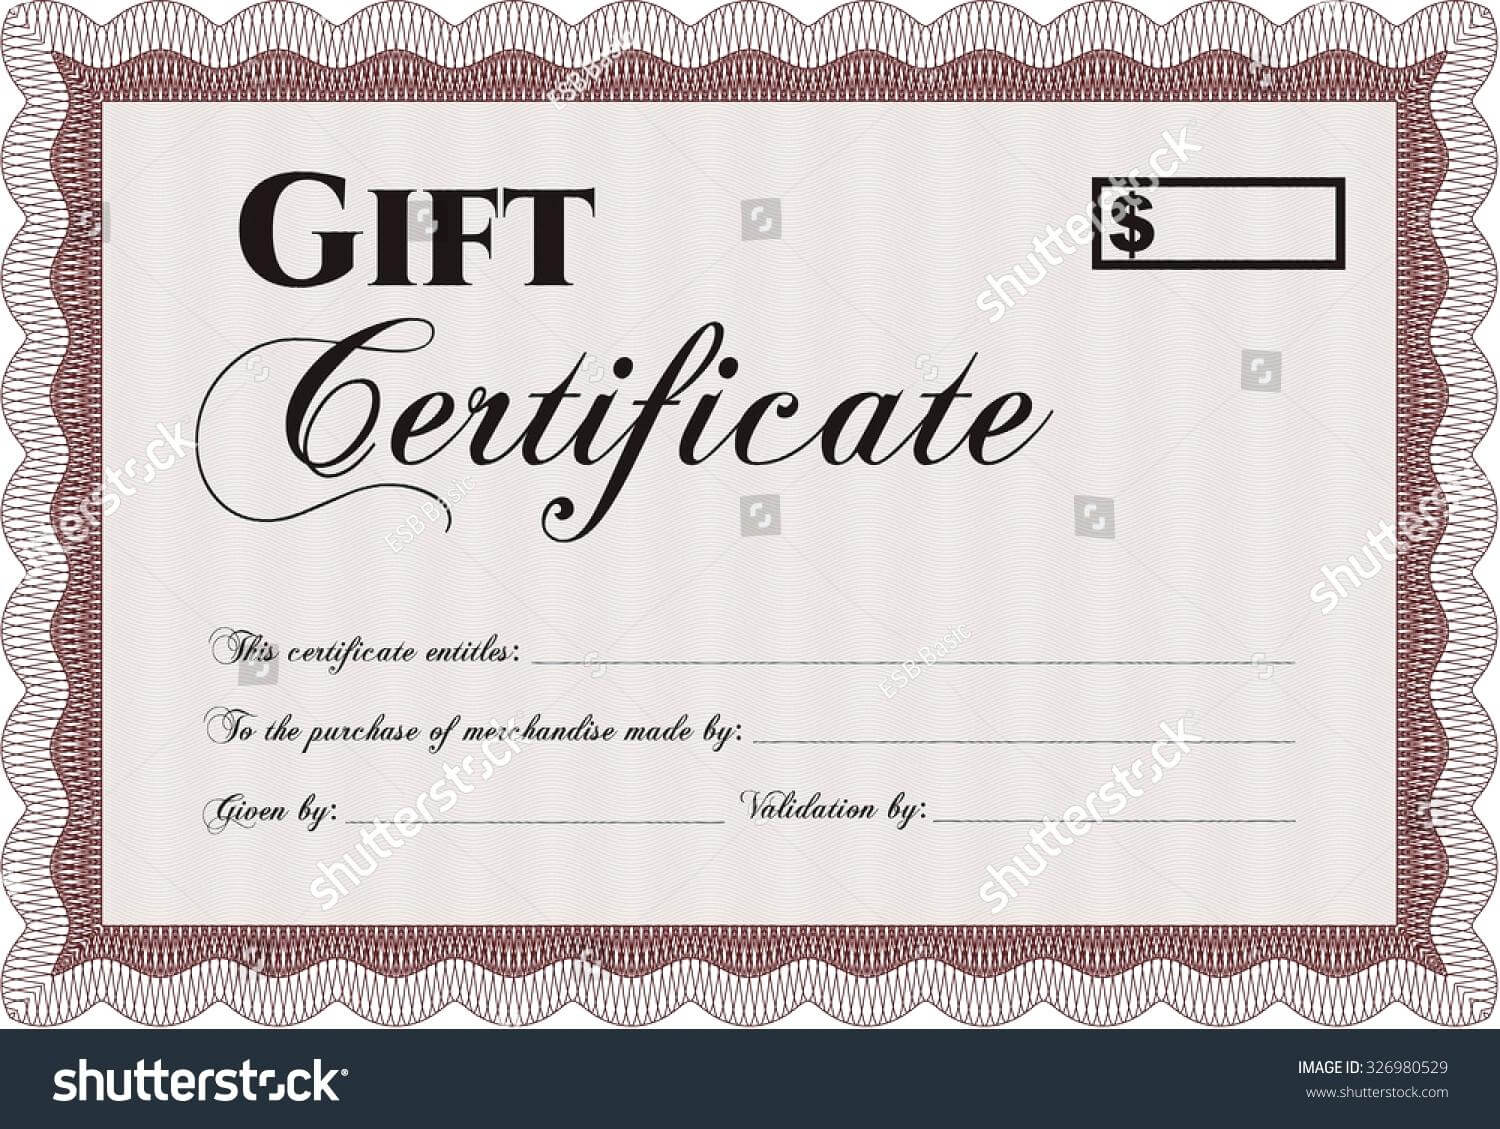 Ideas Collection For This Certificate Entitles The Bearer With This Entitles The Bearer To Template Certificate